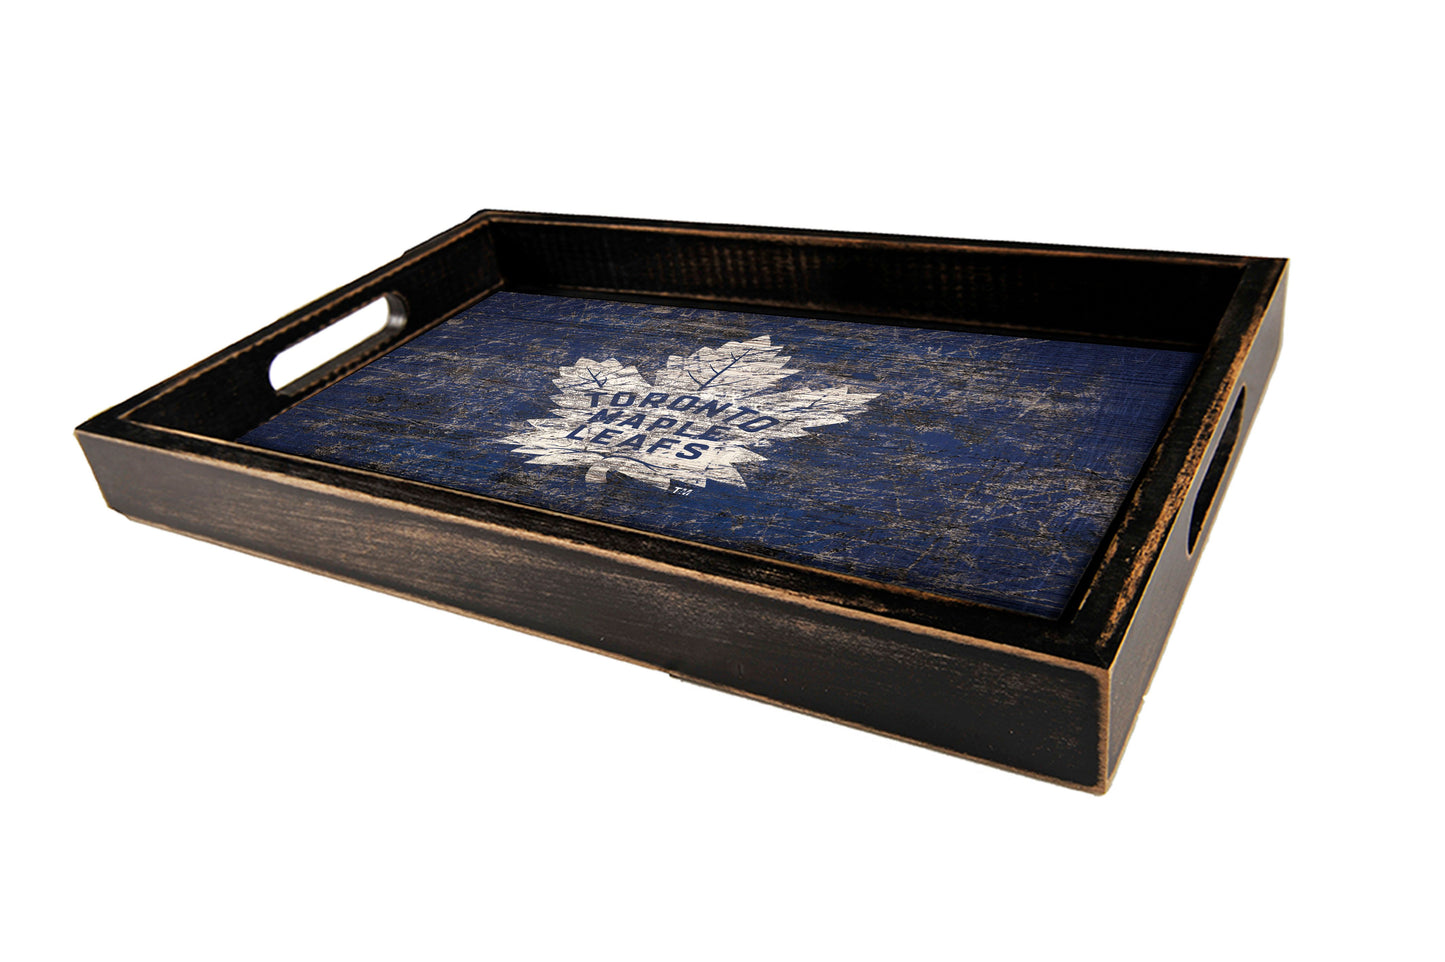 Toronto Maple Leafs Distressed Serving Tray with Team Color by Fan Creations